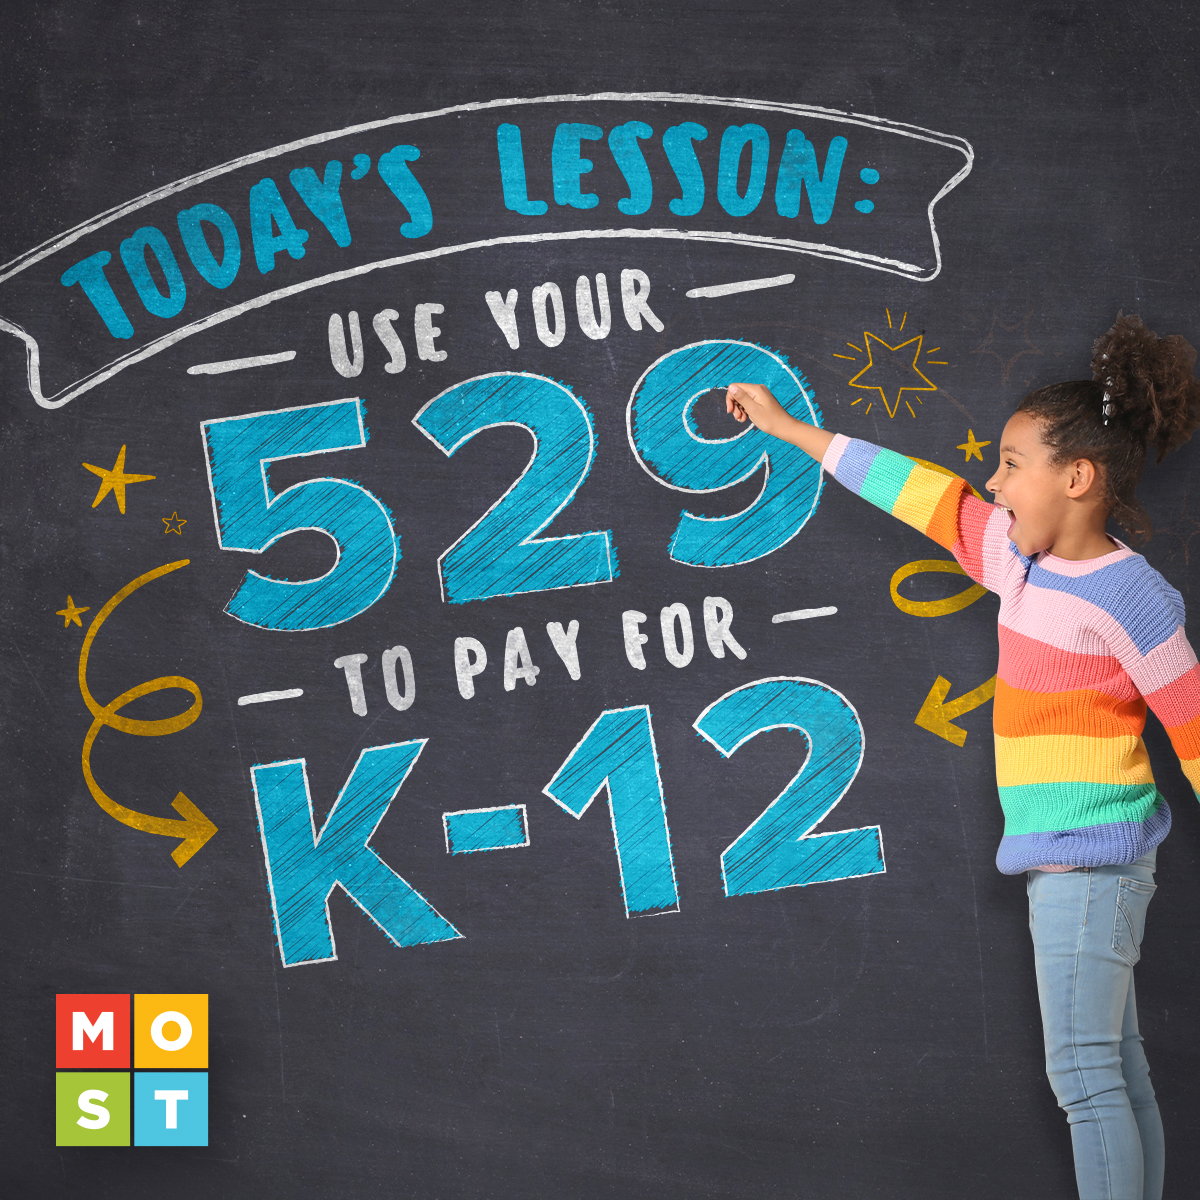 Class is in session! Head over to missourimost.org/home/k-12.html and learn everything there is to know about paying for K-12 tuition with a MOST 529 account.